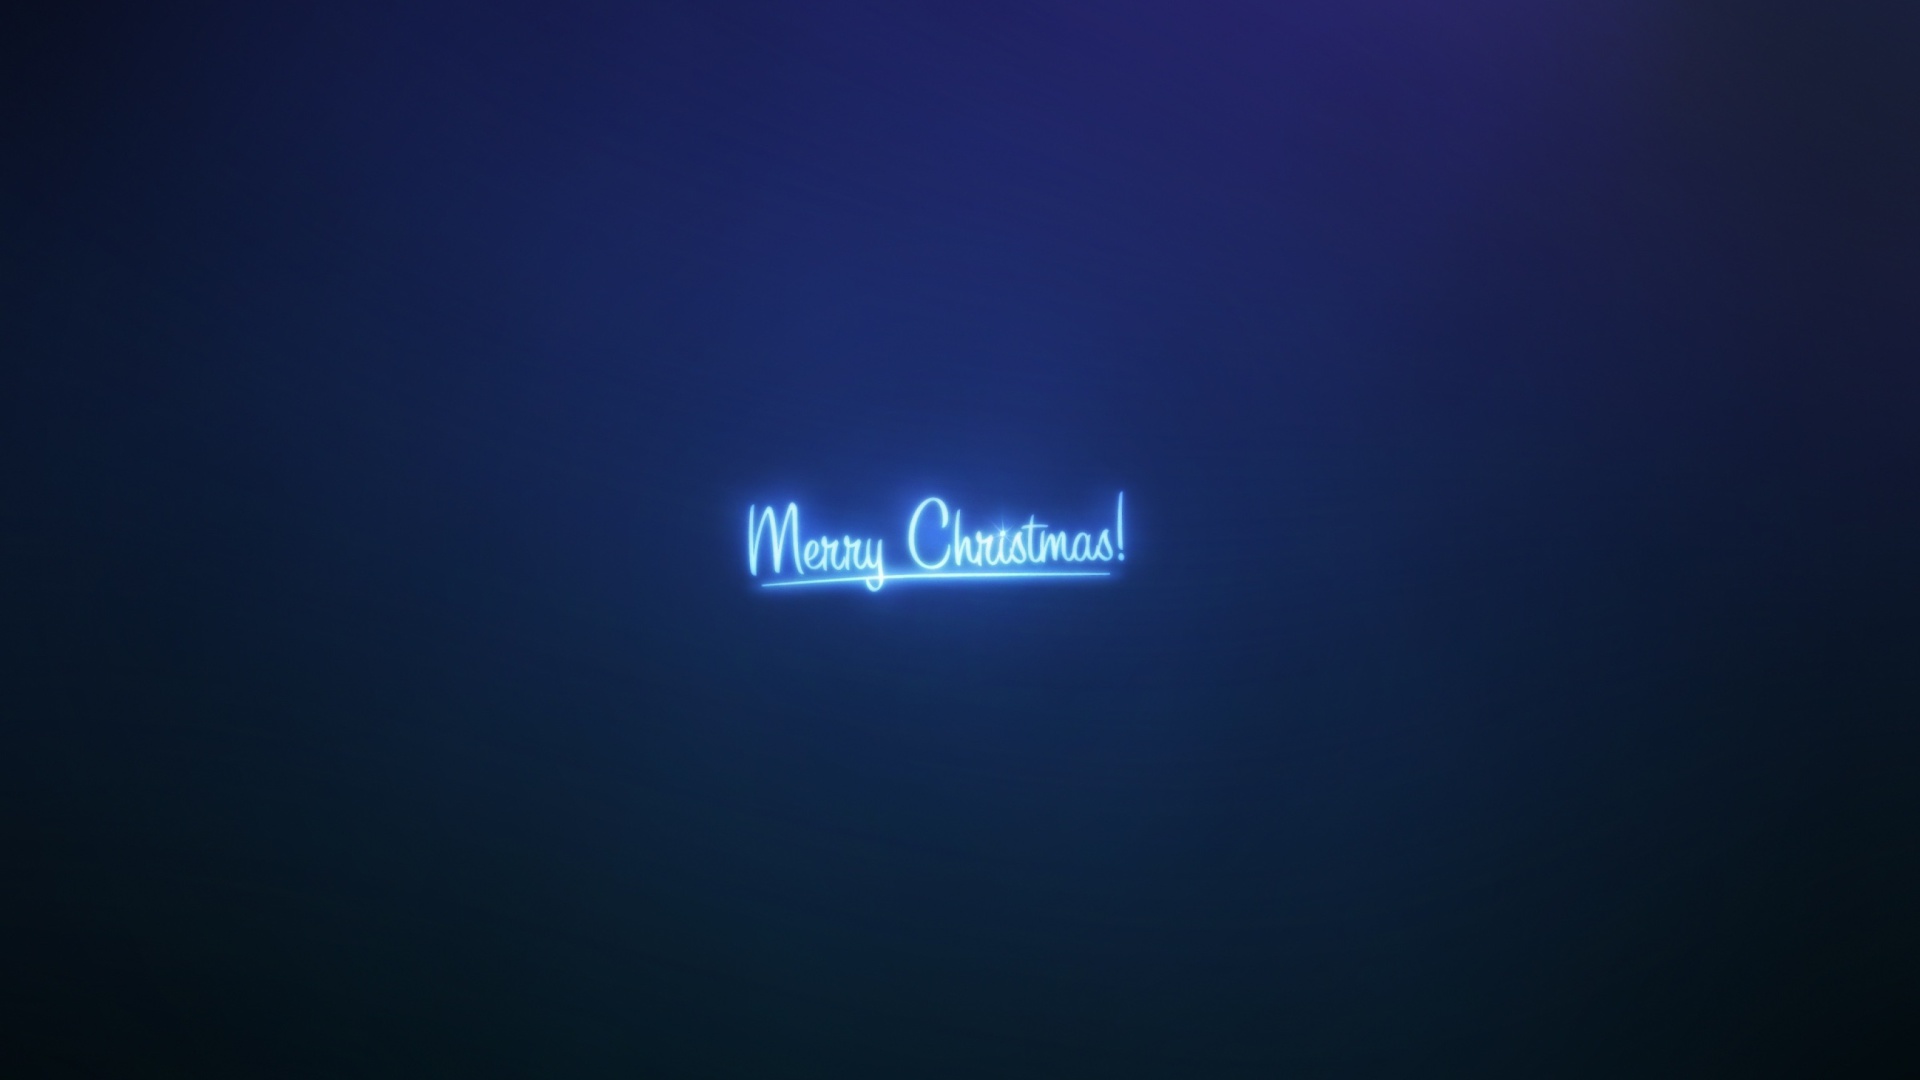 We Wish You a Merry Christmas wallpaper 1920x1080